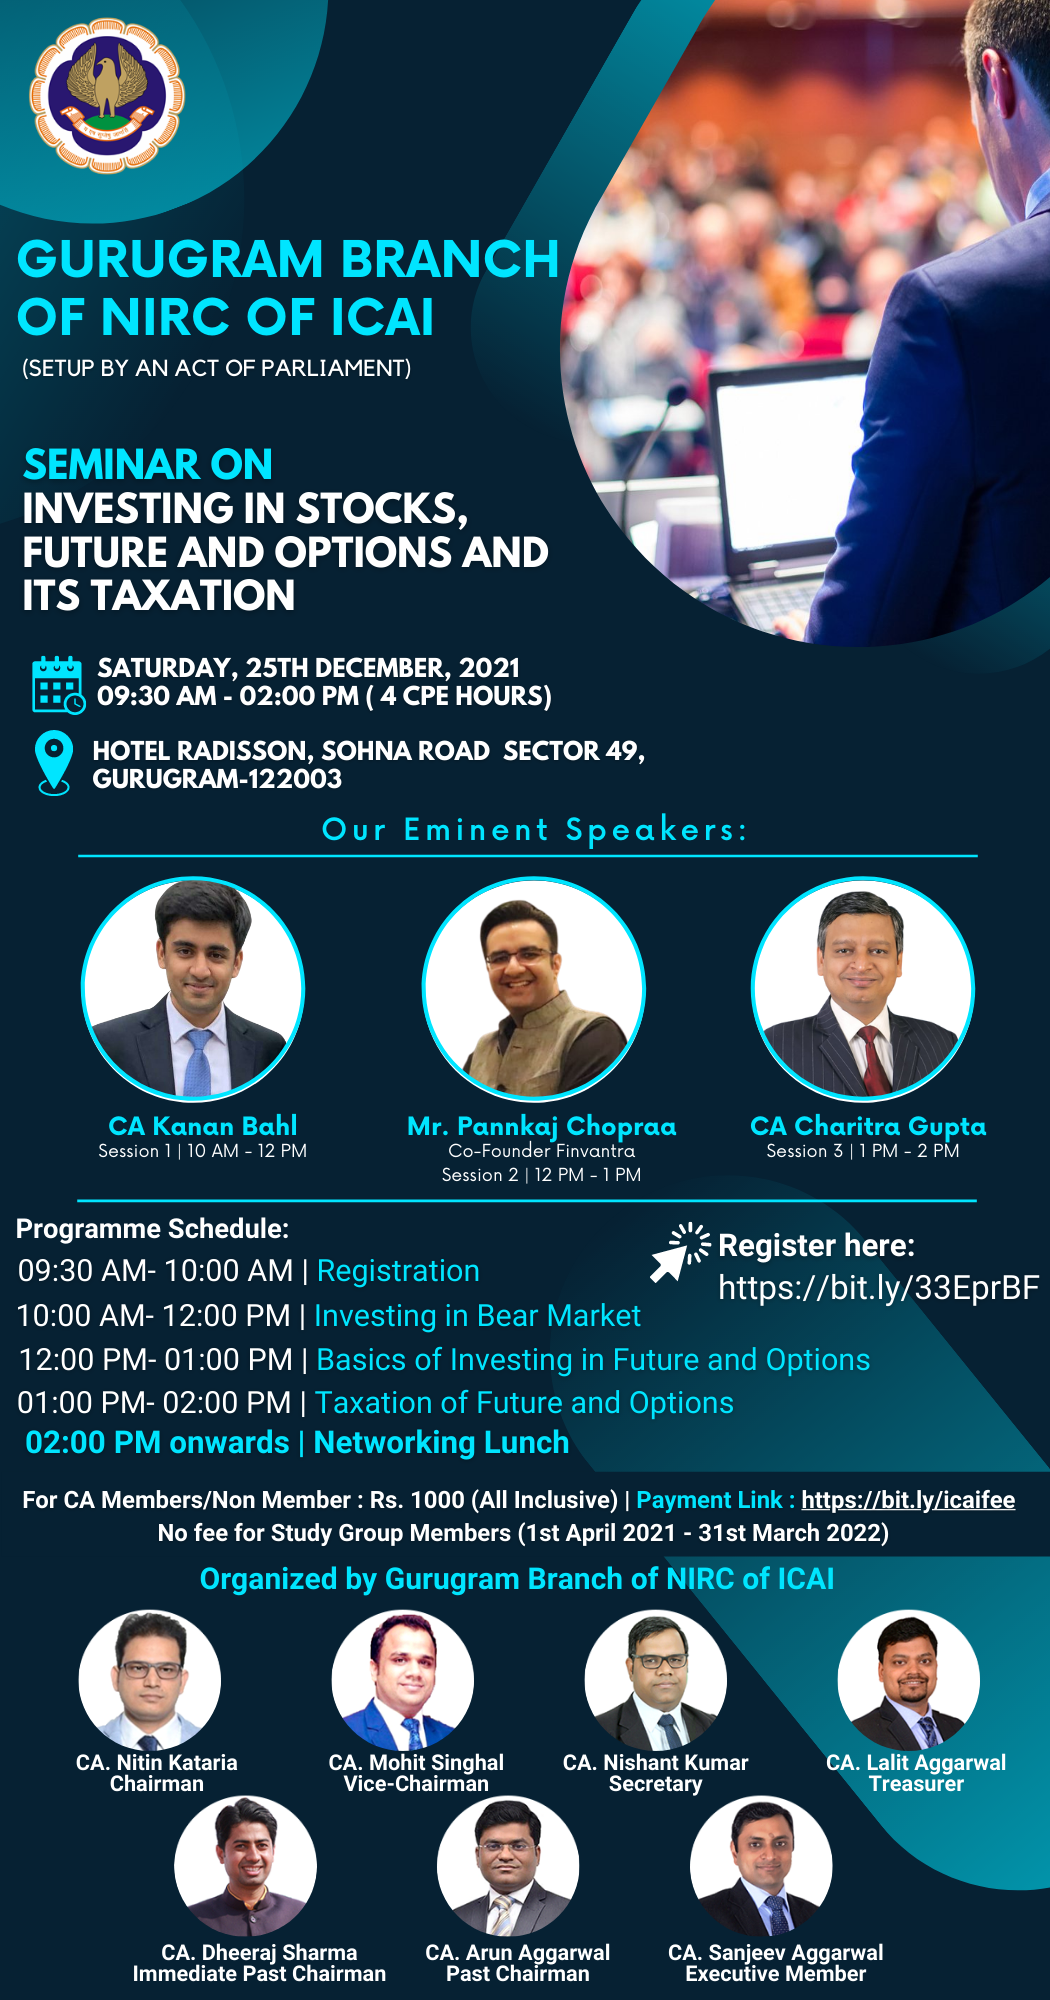 Seminar on Investing in Stocks, Future and Options and its Taxation